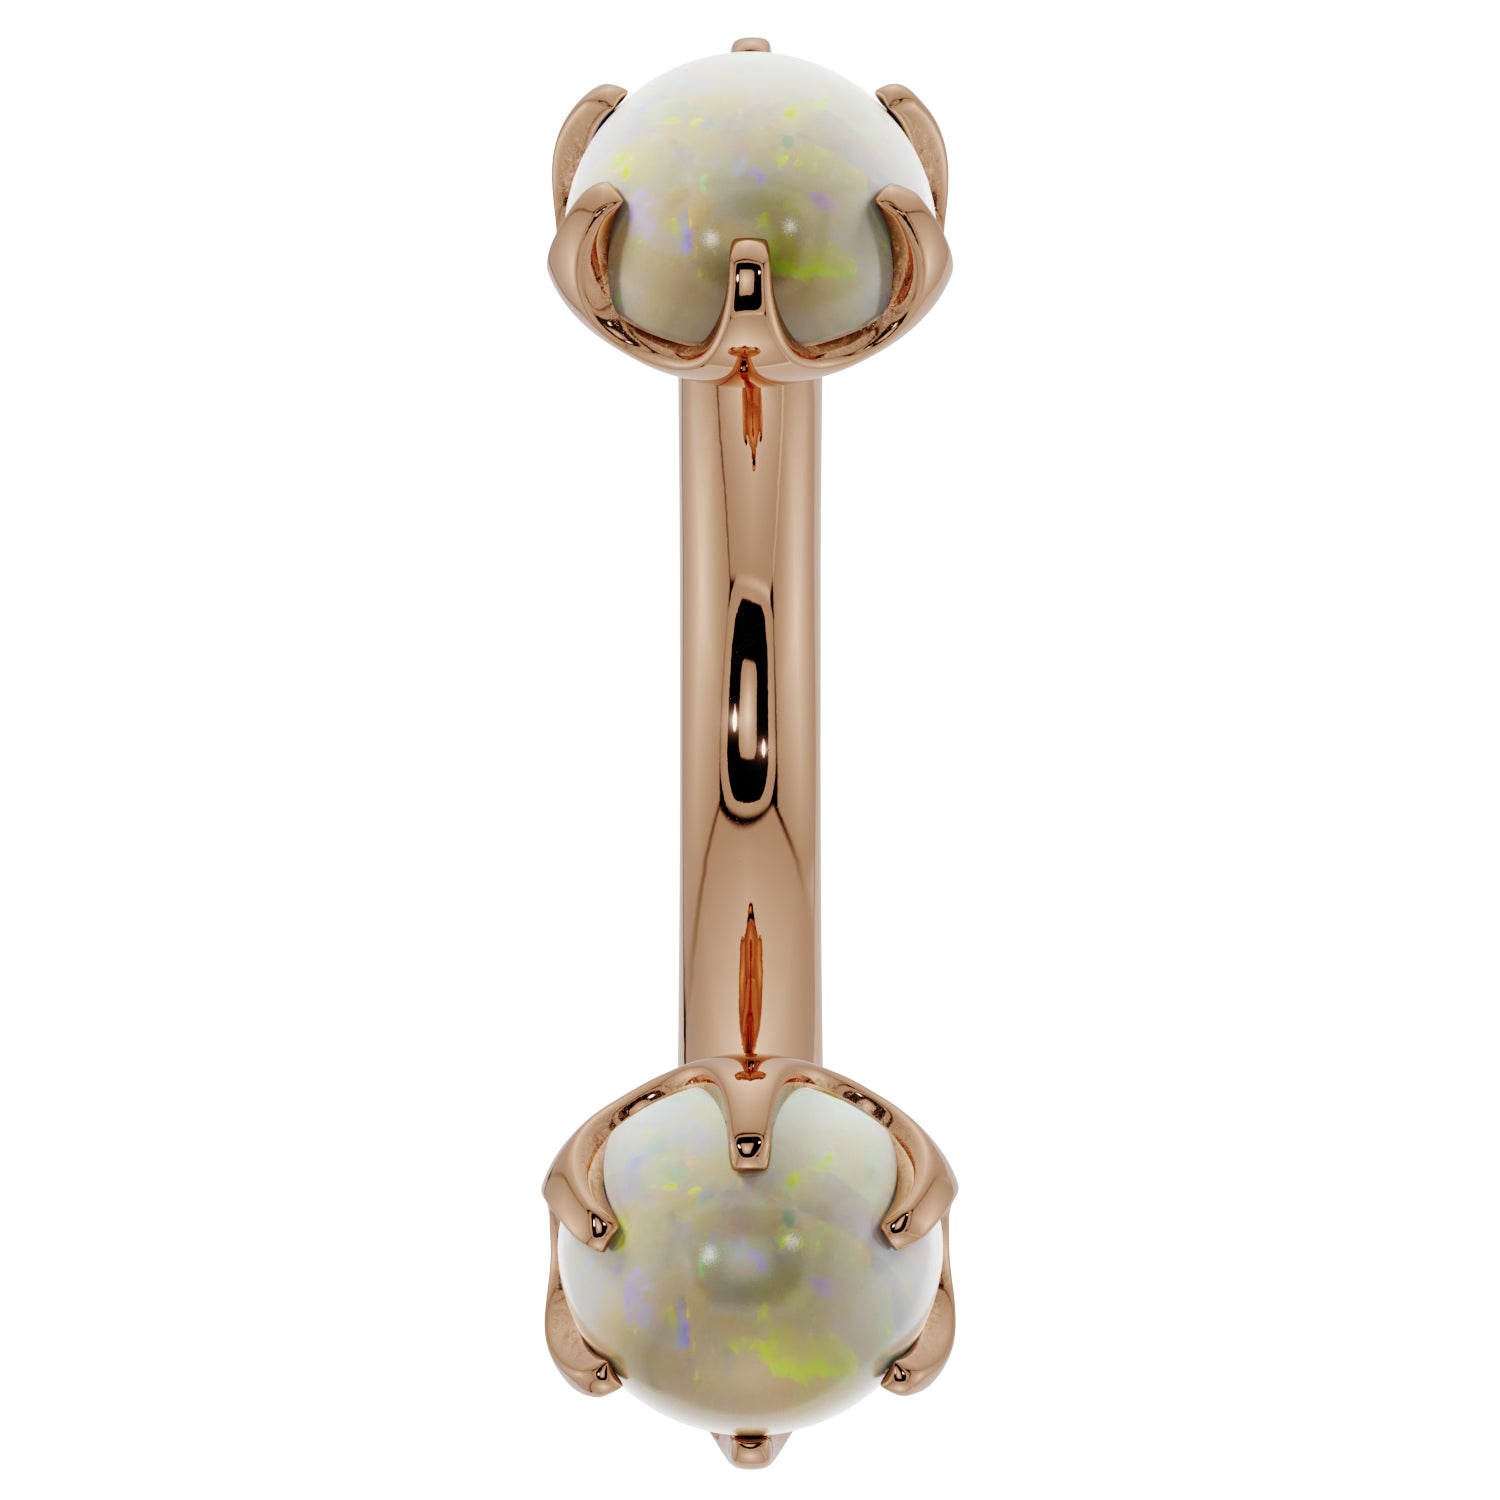 Opal Prong-Set Eyebrow Rook Belly Curved Barbell-14K Rose Gold   14G (1.6mm) (Belly Ring)   7 16